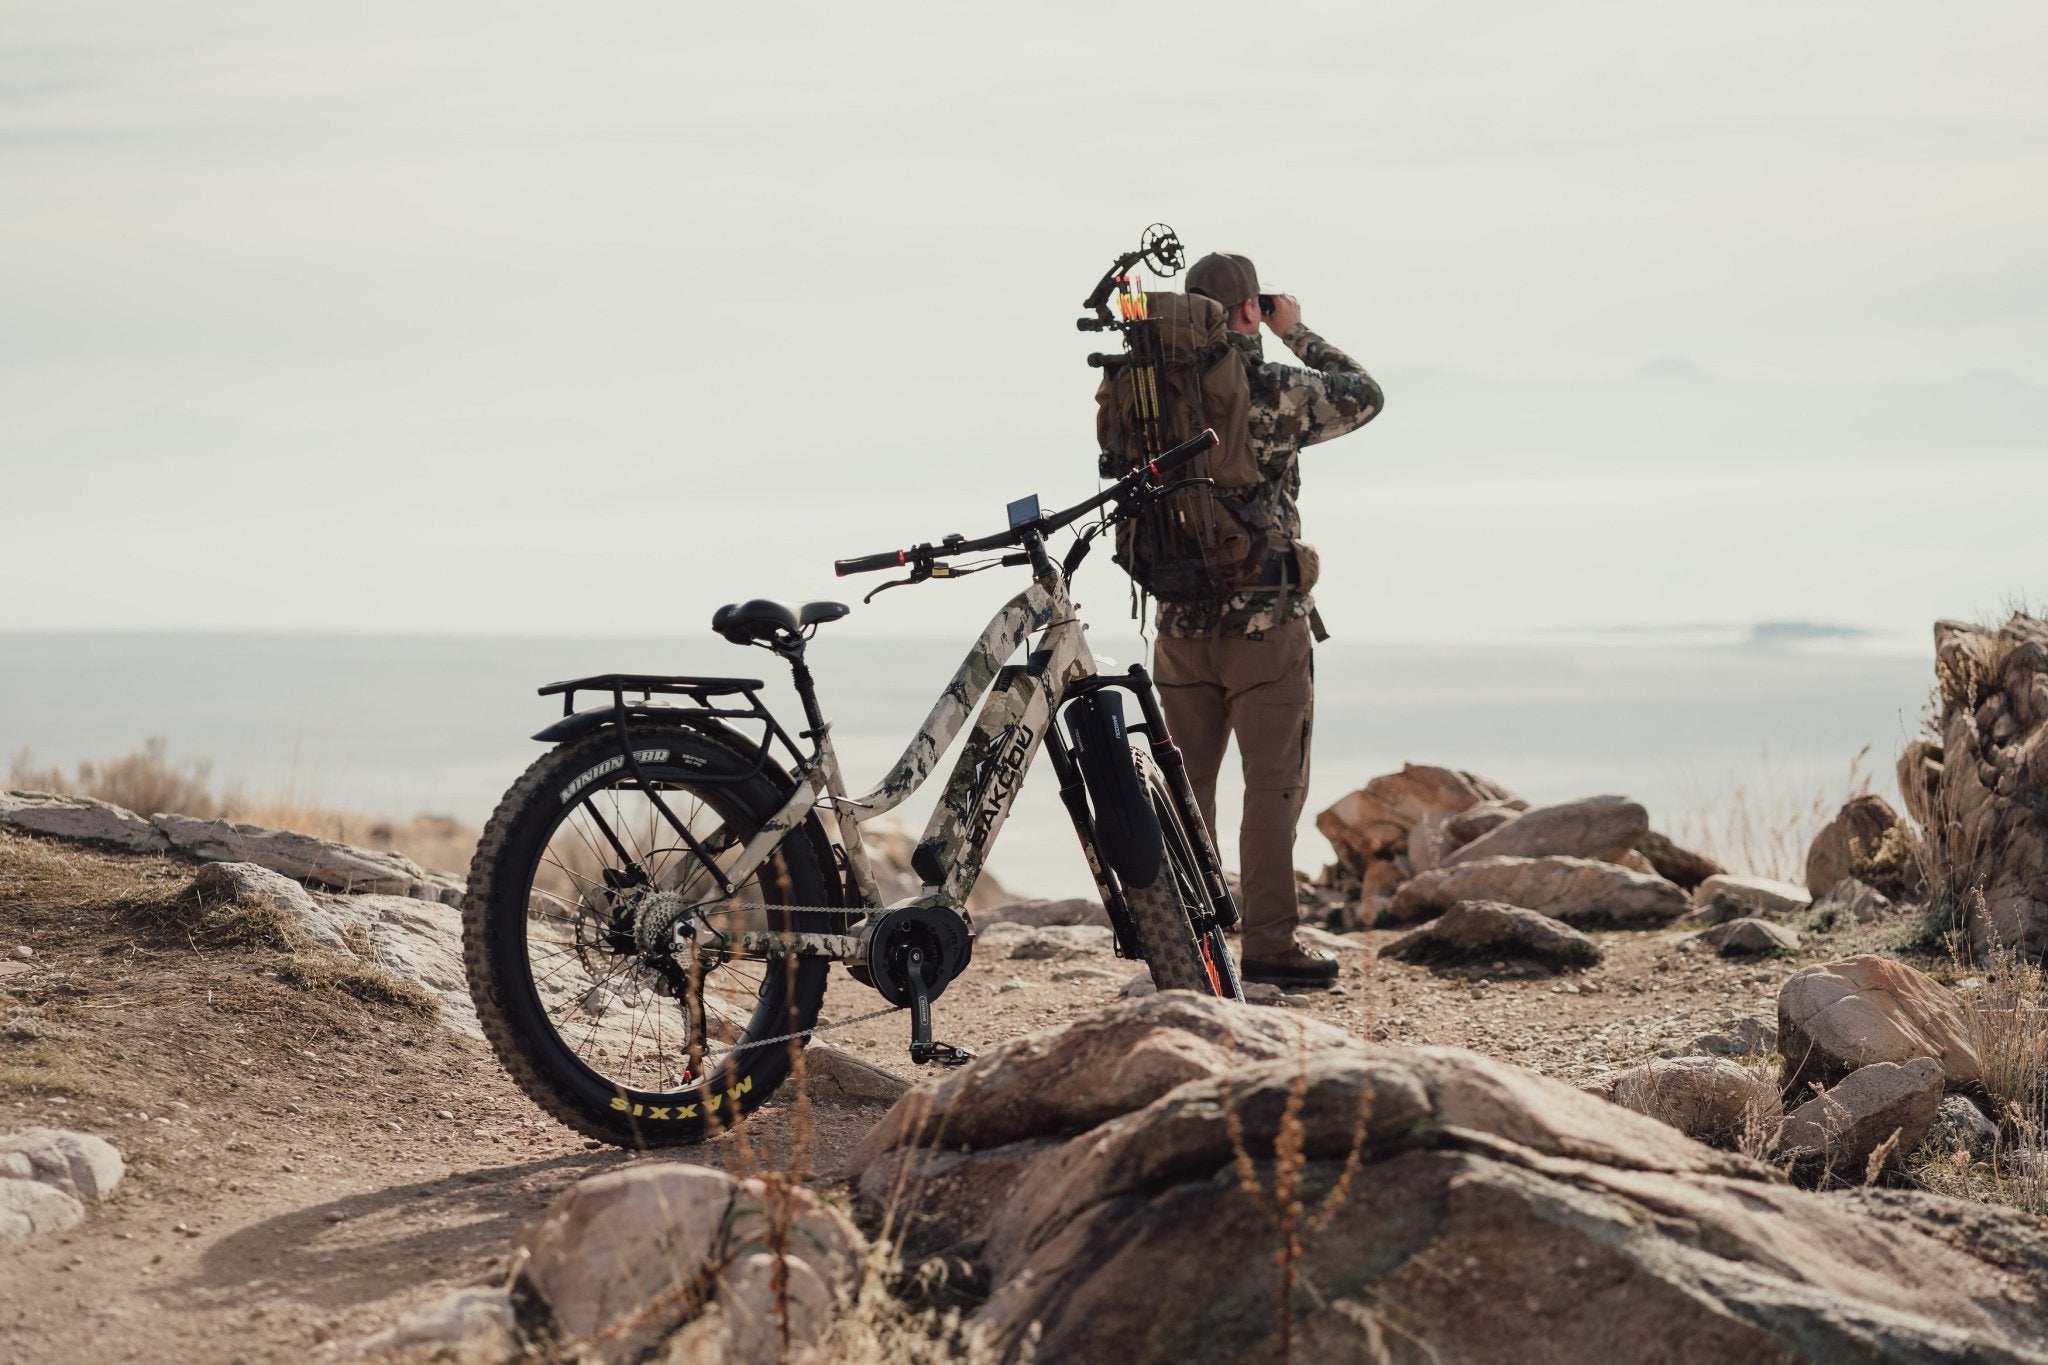 The Bakcou Mule – The Number One Selling Fat-Tire Electric Hunting Bike - Bakcou